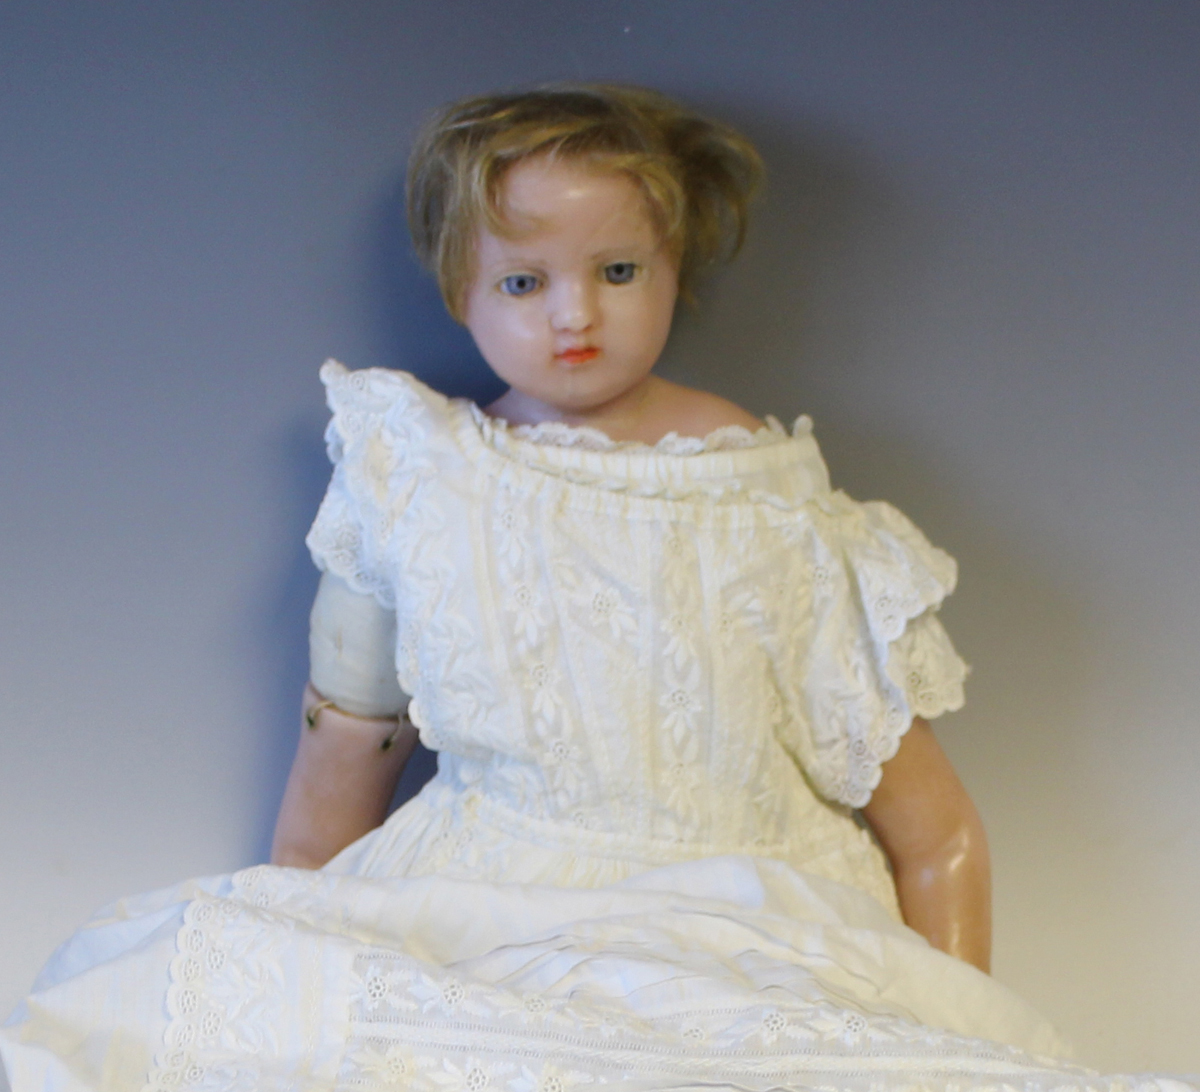 A Pierotti type wax head and shoulders doll with blonde hair, fixed blue eyes, red lips and fabric